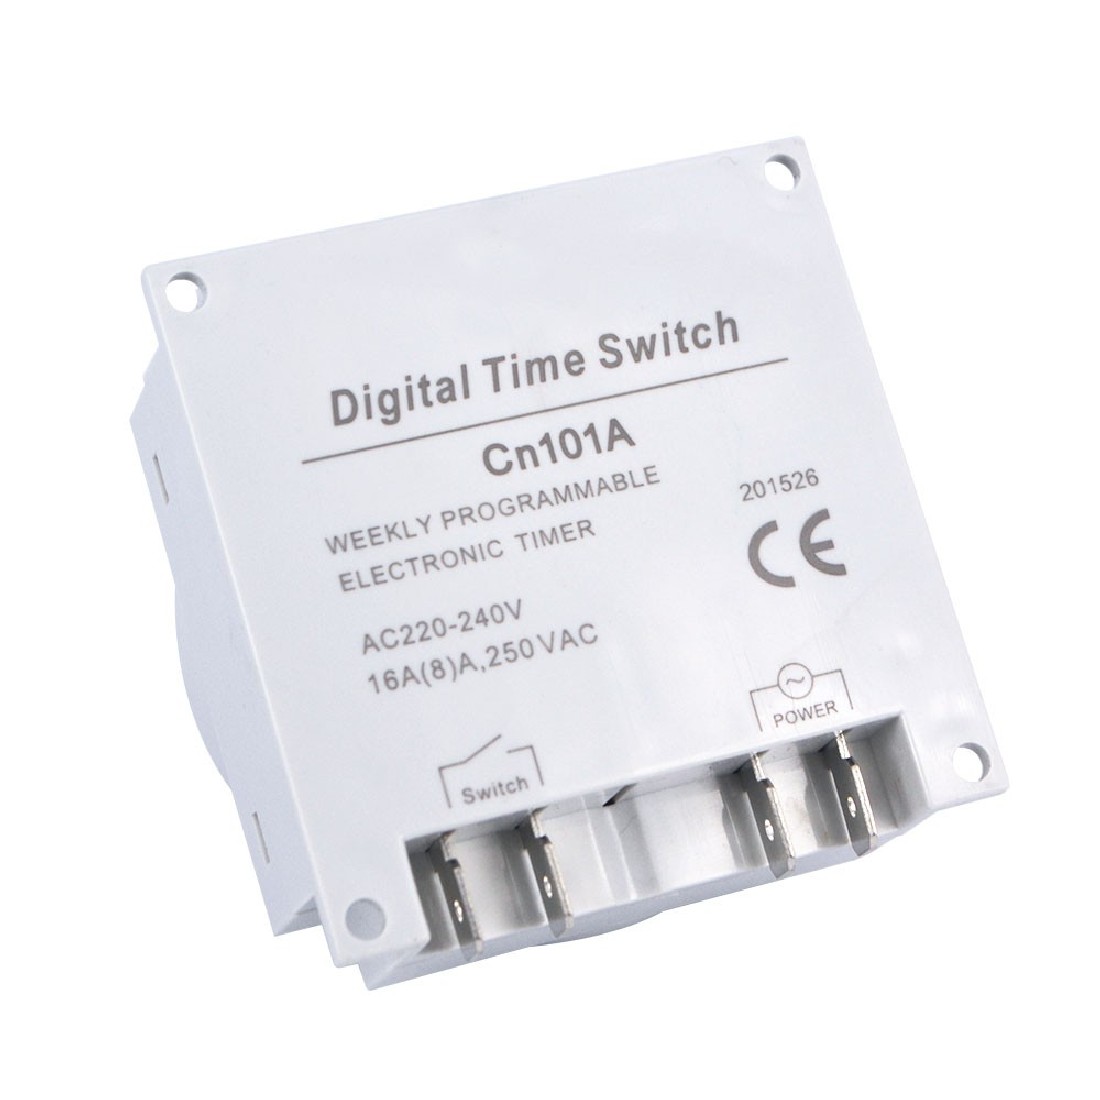 LCD Power Digital 12V/ 24V/ 110V/ 220V AC/DC 7 Days Programmable Timer Time Switch 1Min to 168H Built-in Rechargeable Battery